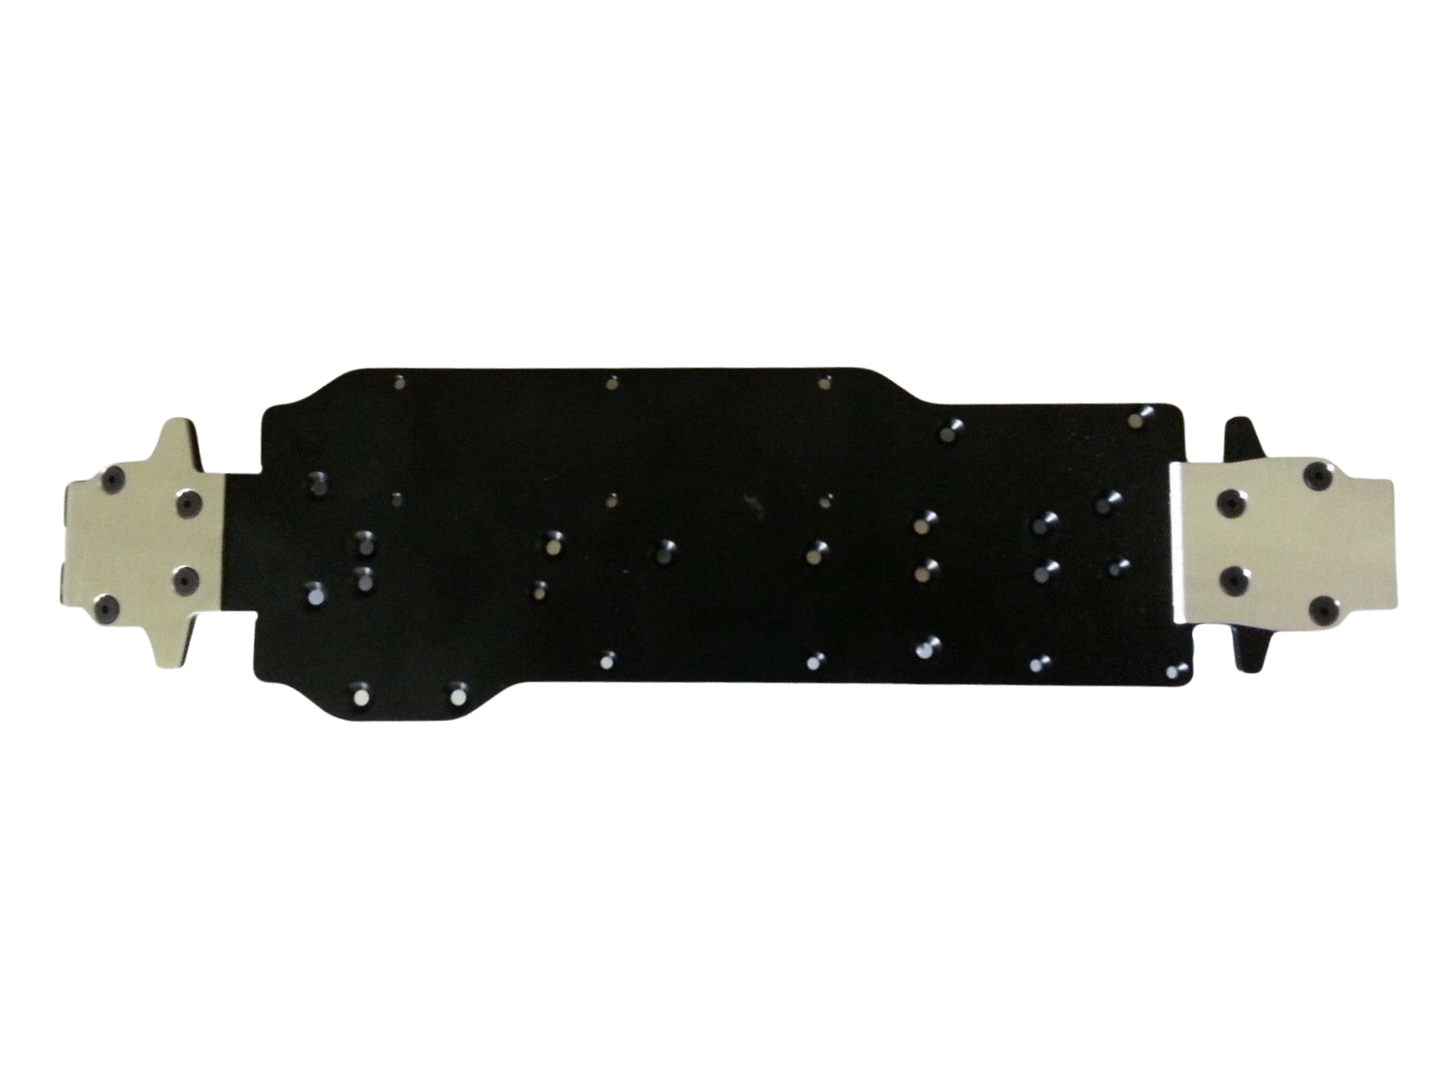 Sumo Racing Skid Plates for Tekno EB/NB/ET/NT48.1, .2, .3 & SCT410 Models (Not newew 2.0/2.1)